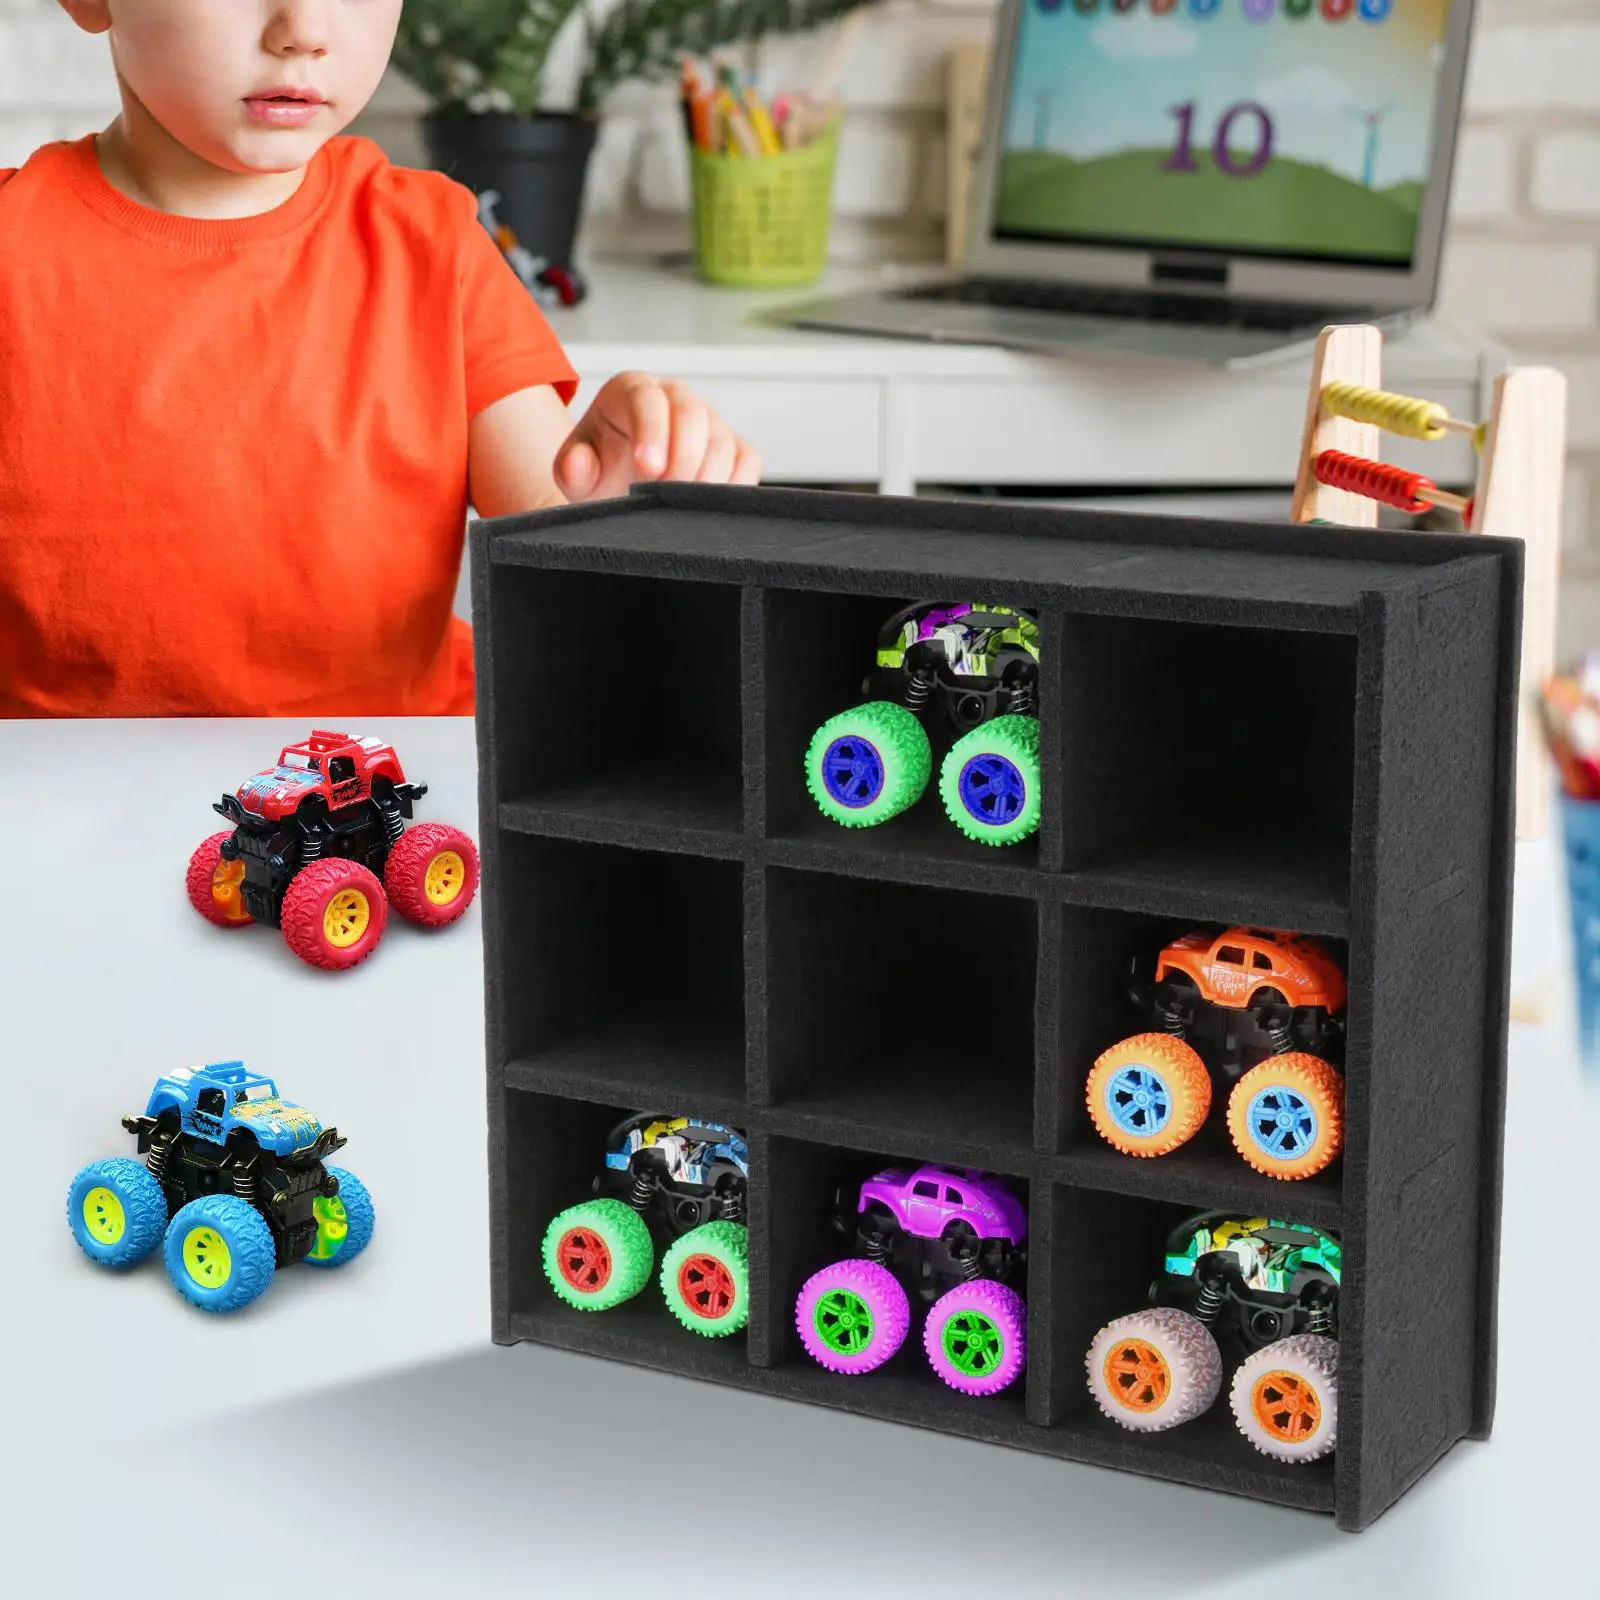 1:64 Scale Toy Trucks Door Wall Mounted Storage Case Felt Material for Kids to Organize Versatile